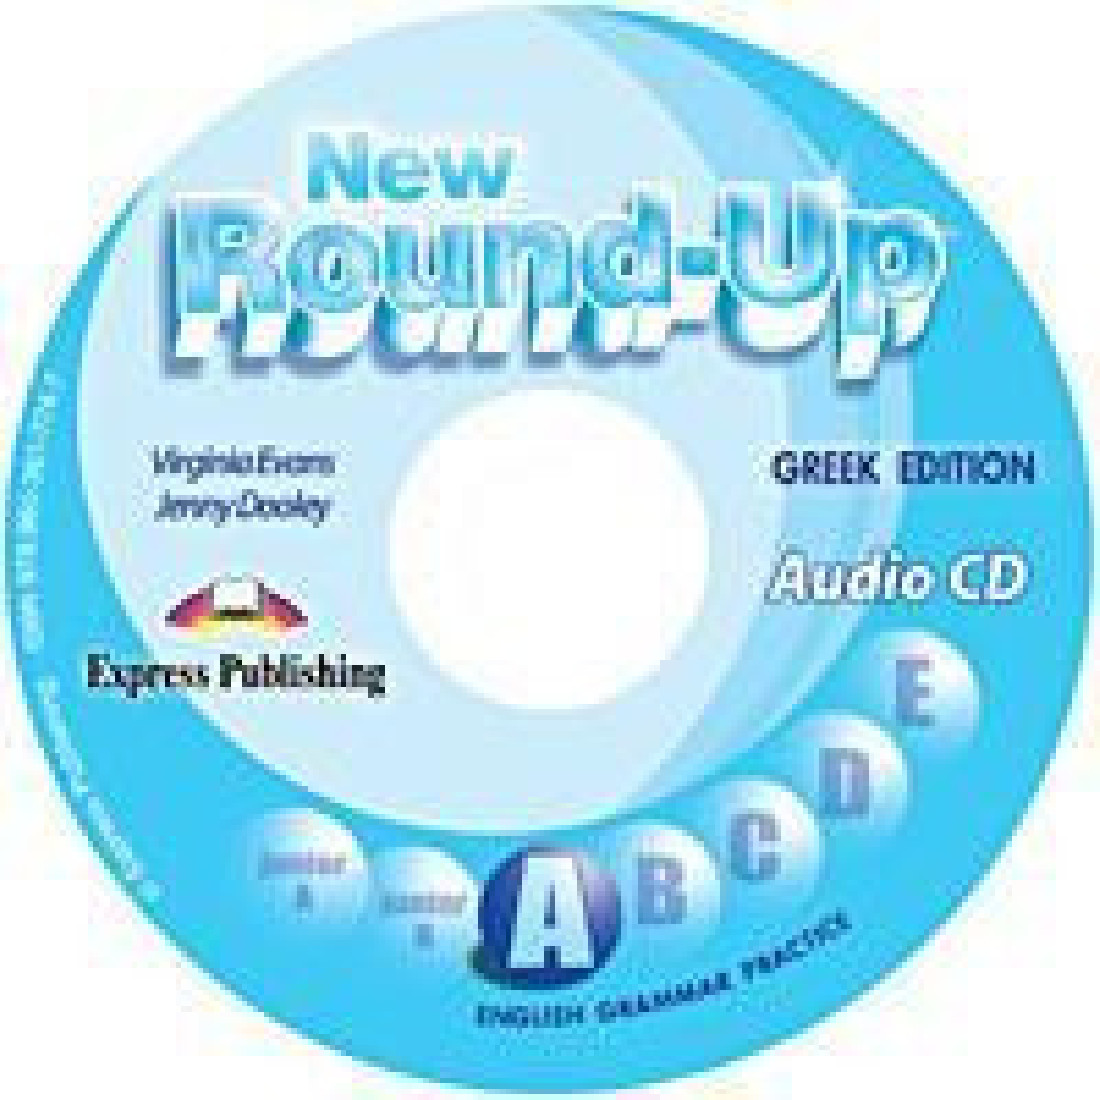 NEW ROUND UP A CD